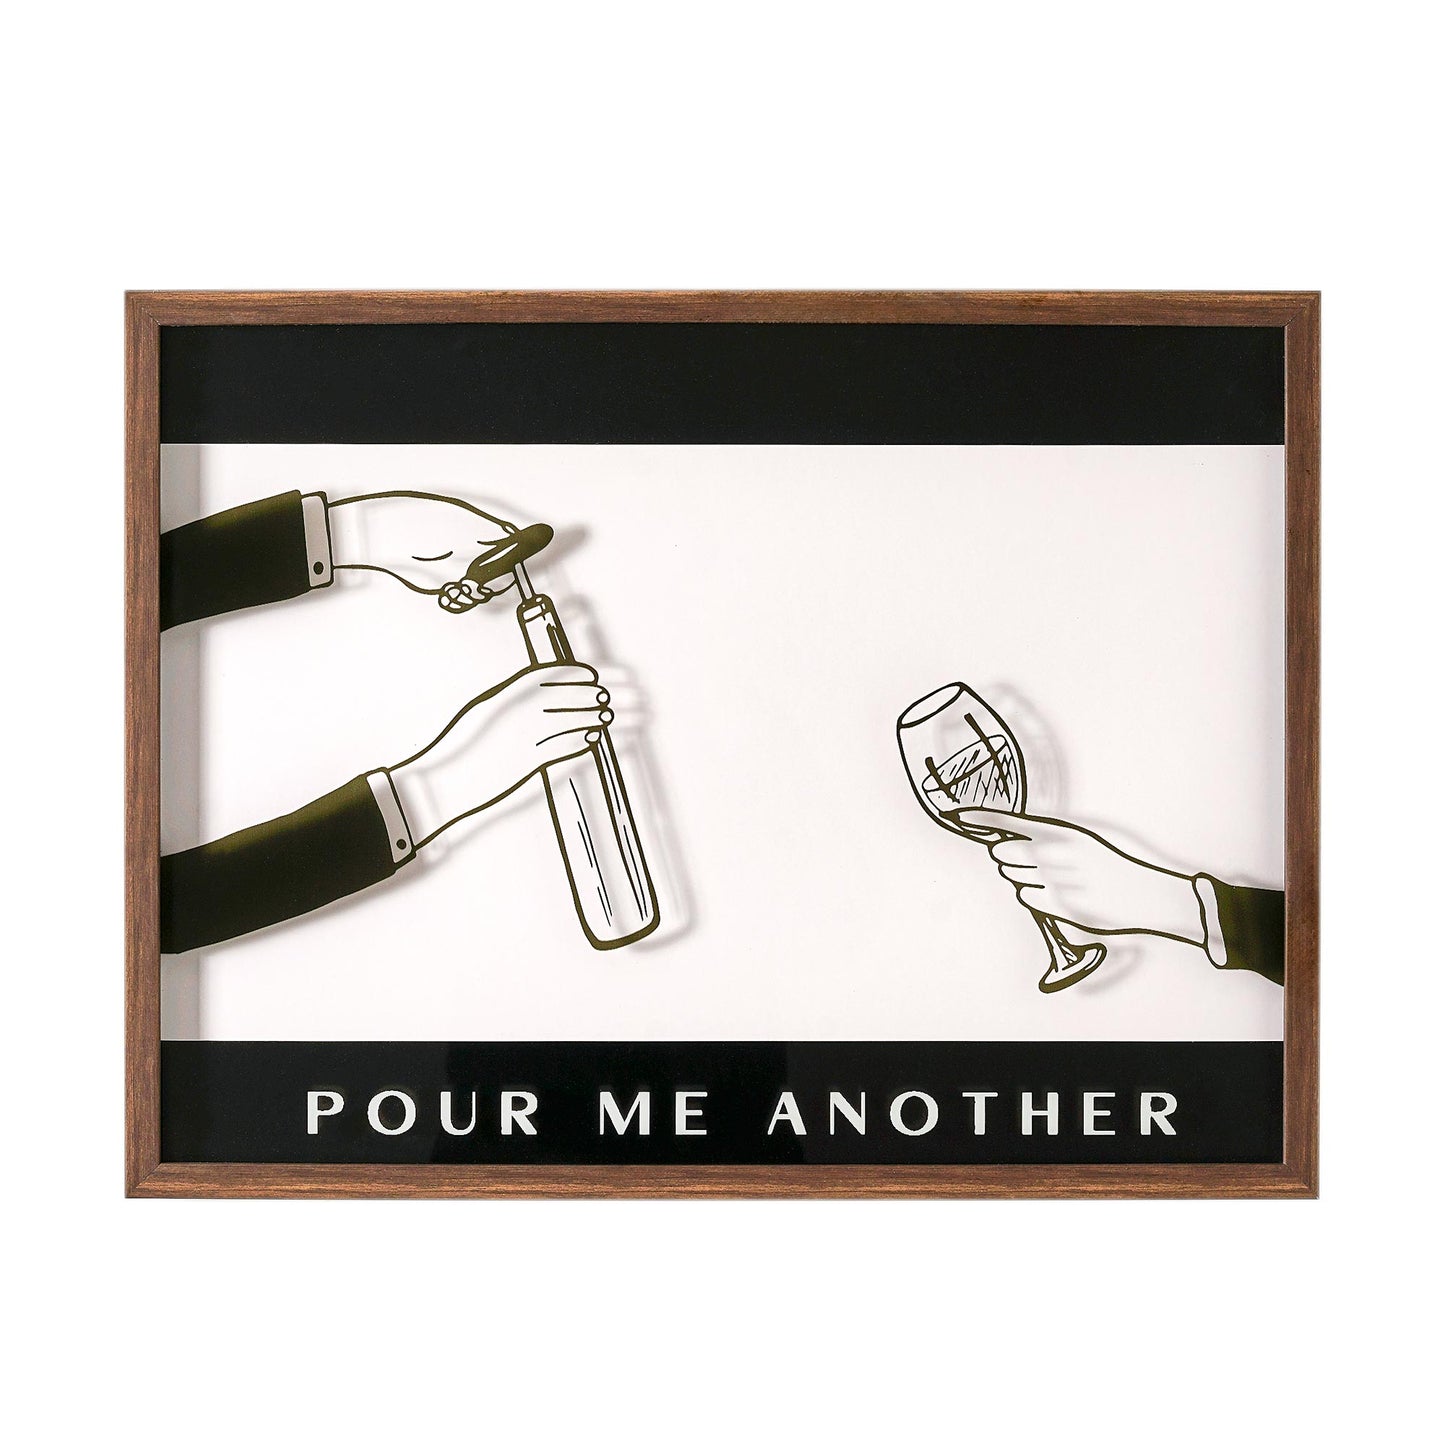 Pour Me Another Printed Glass Framed Wall Decor